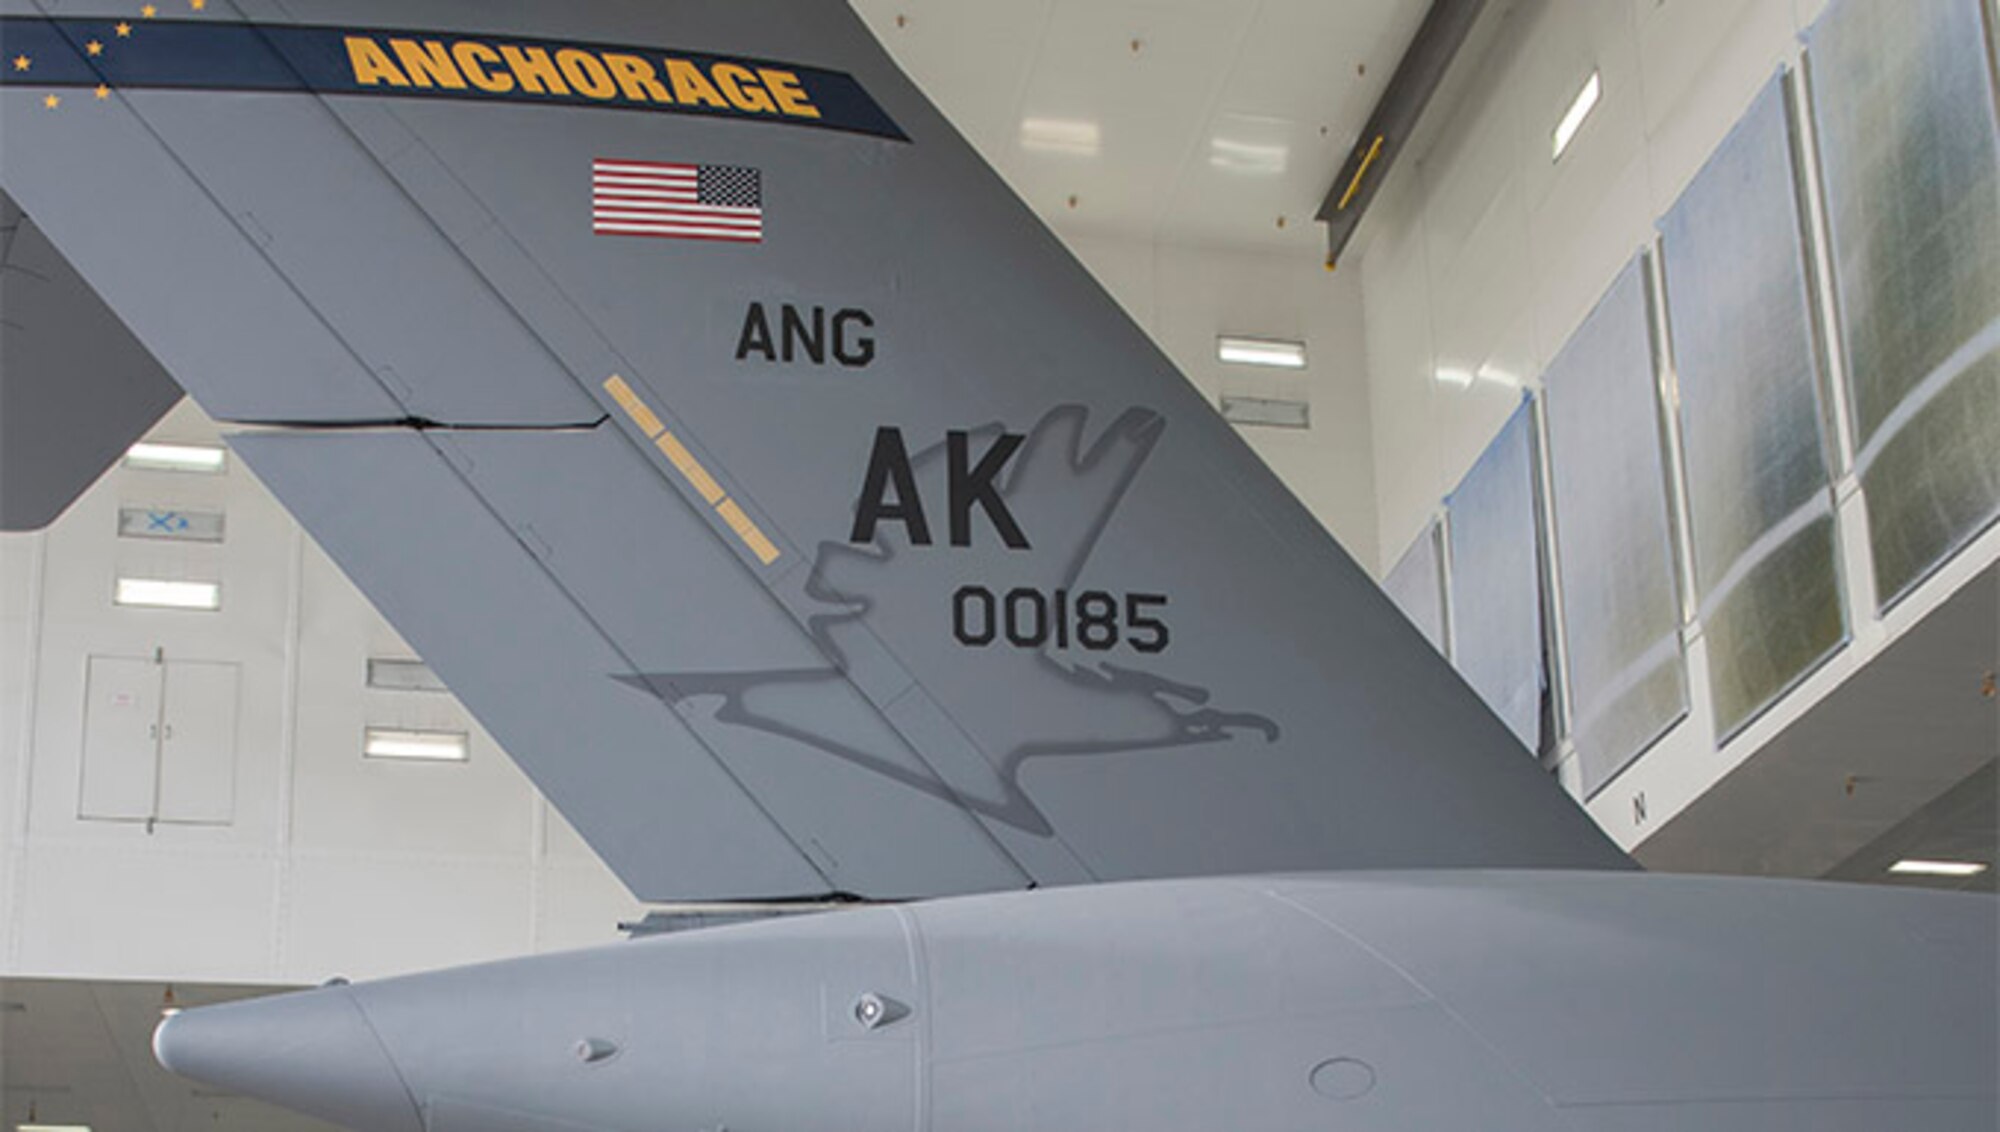 Members of the Alaska Air National Guard’s 176th Wing and the Regular Air Force’s 3rd Wing witnessed the unveiling of a new tail flash on the C-17 Globemaster IIIs assigned to the 176th Wing’s 144th Airlift Squadron at Joint Base Elmendorf-Richardson, Alaska, Oct. 1, 2018. The new tail flash depicts a wolf head, (the 144th AS’s emblem), on one side, and a firebird (the 517th AS’s emblem), of equal size on the other. (U.S. Air National Guard photo by Tech. Sgt. N. Alicia Halla